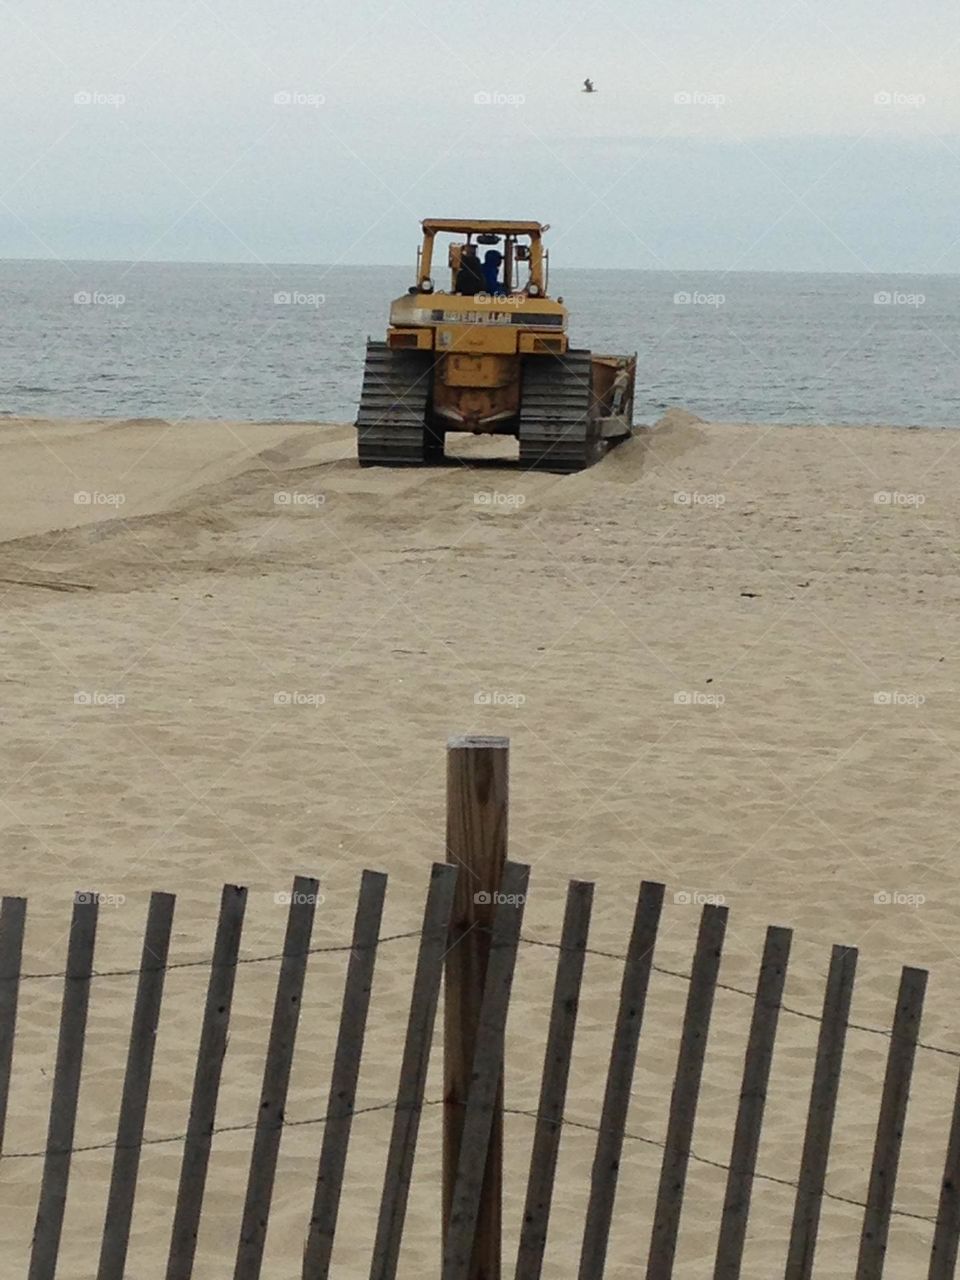 A man in a bulldozer works on the beach dunes in Point Pleasant Beach, NJ. Here he sits atop a hill facing the ocean as a seagull flies by. I wish I had a view like this at work. 